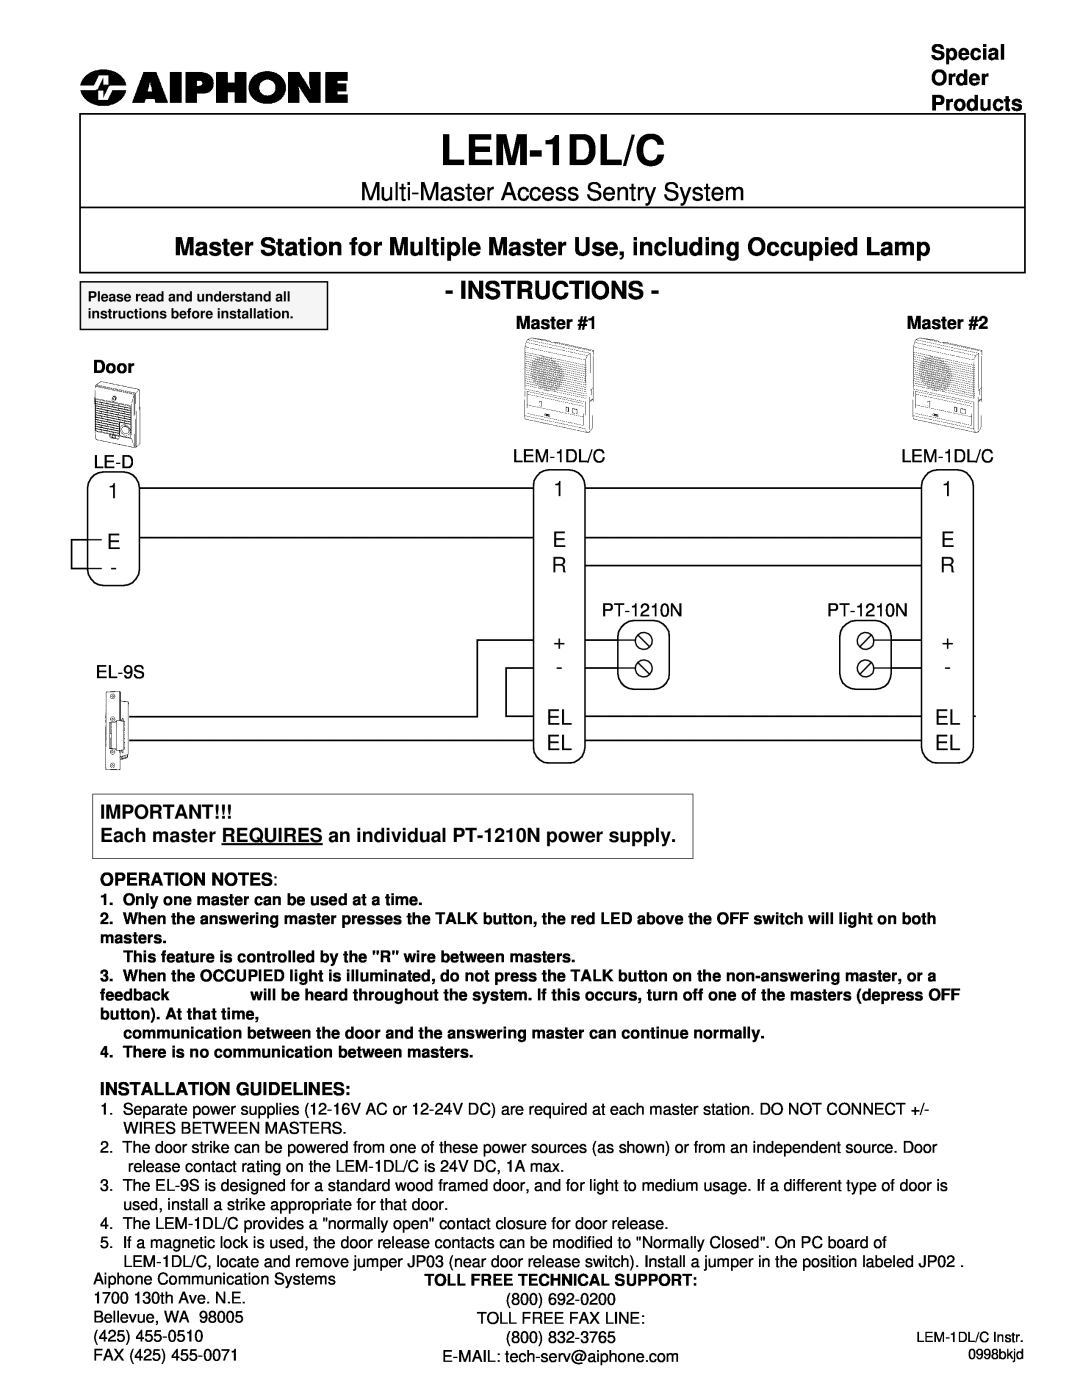 Aiphone LEM-1DL installation manual Single Master Station with Door Release, Optional Components & Accessories, release 